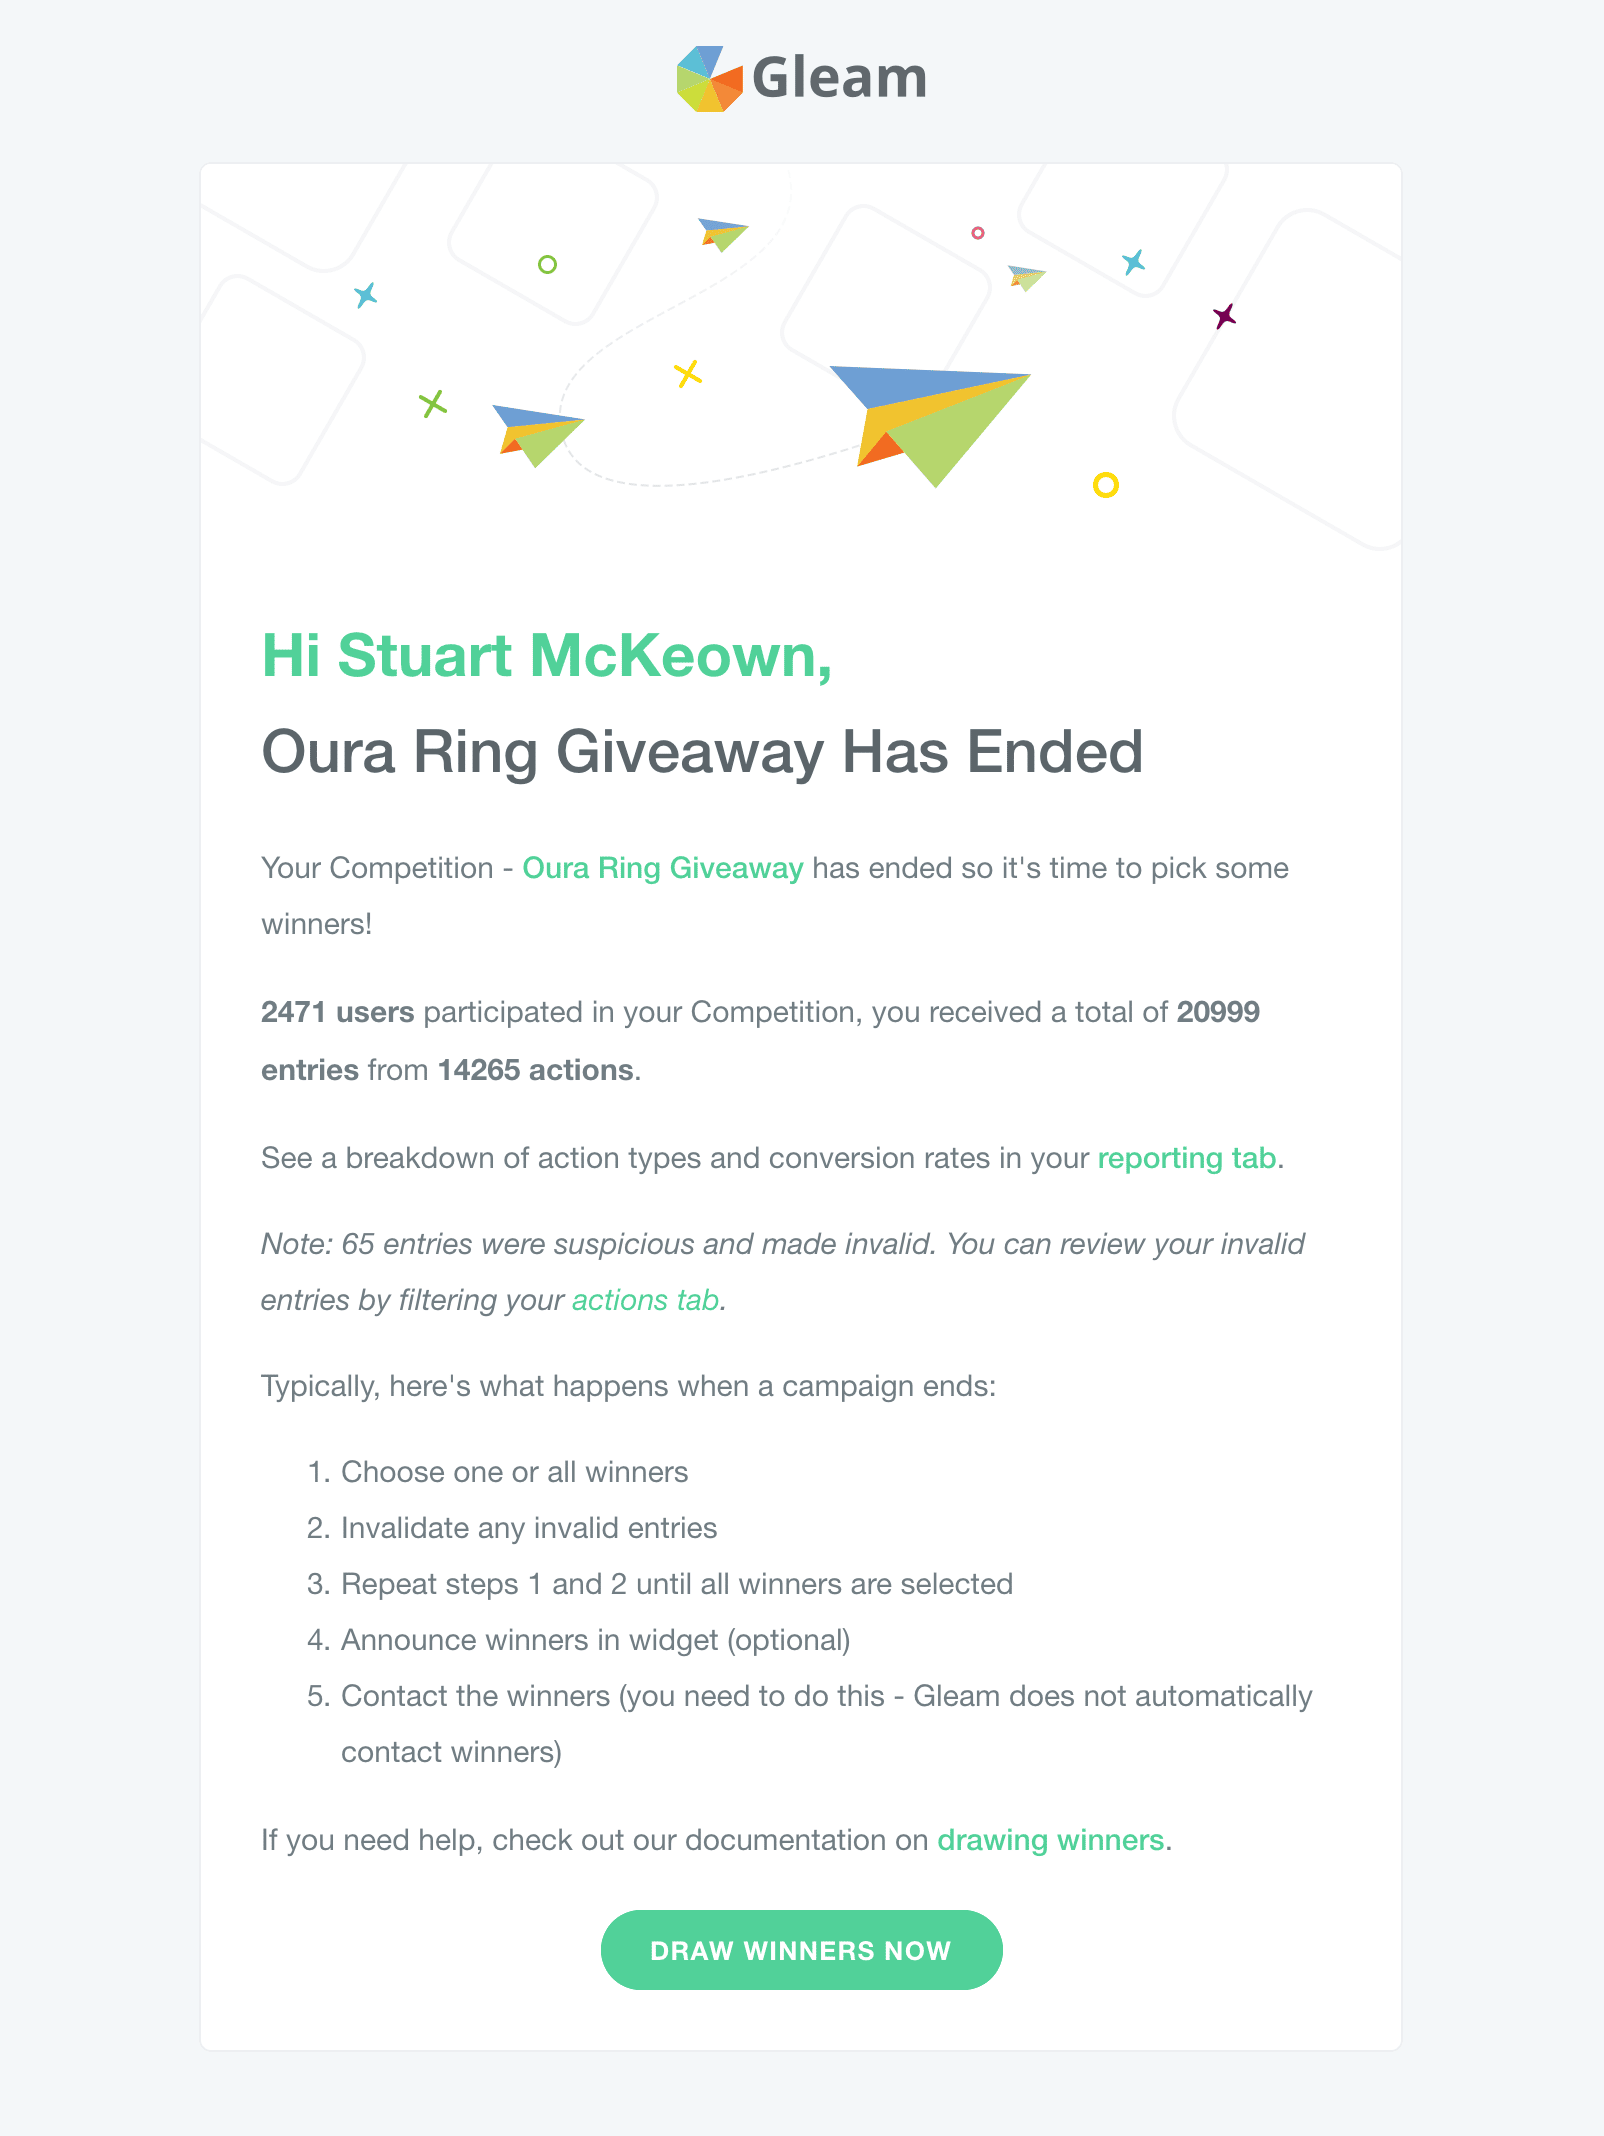 Campaign Ended Notification email for Gleam Competitions